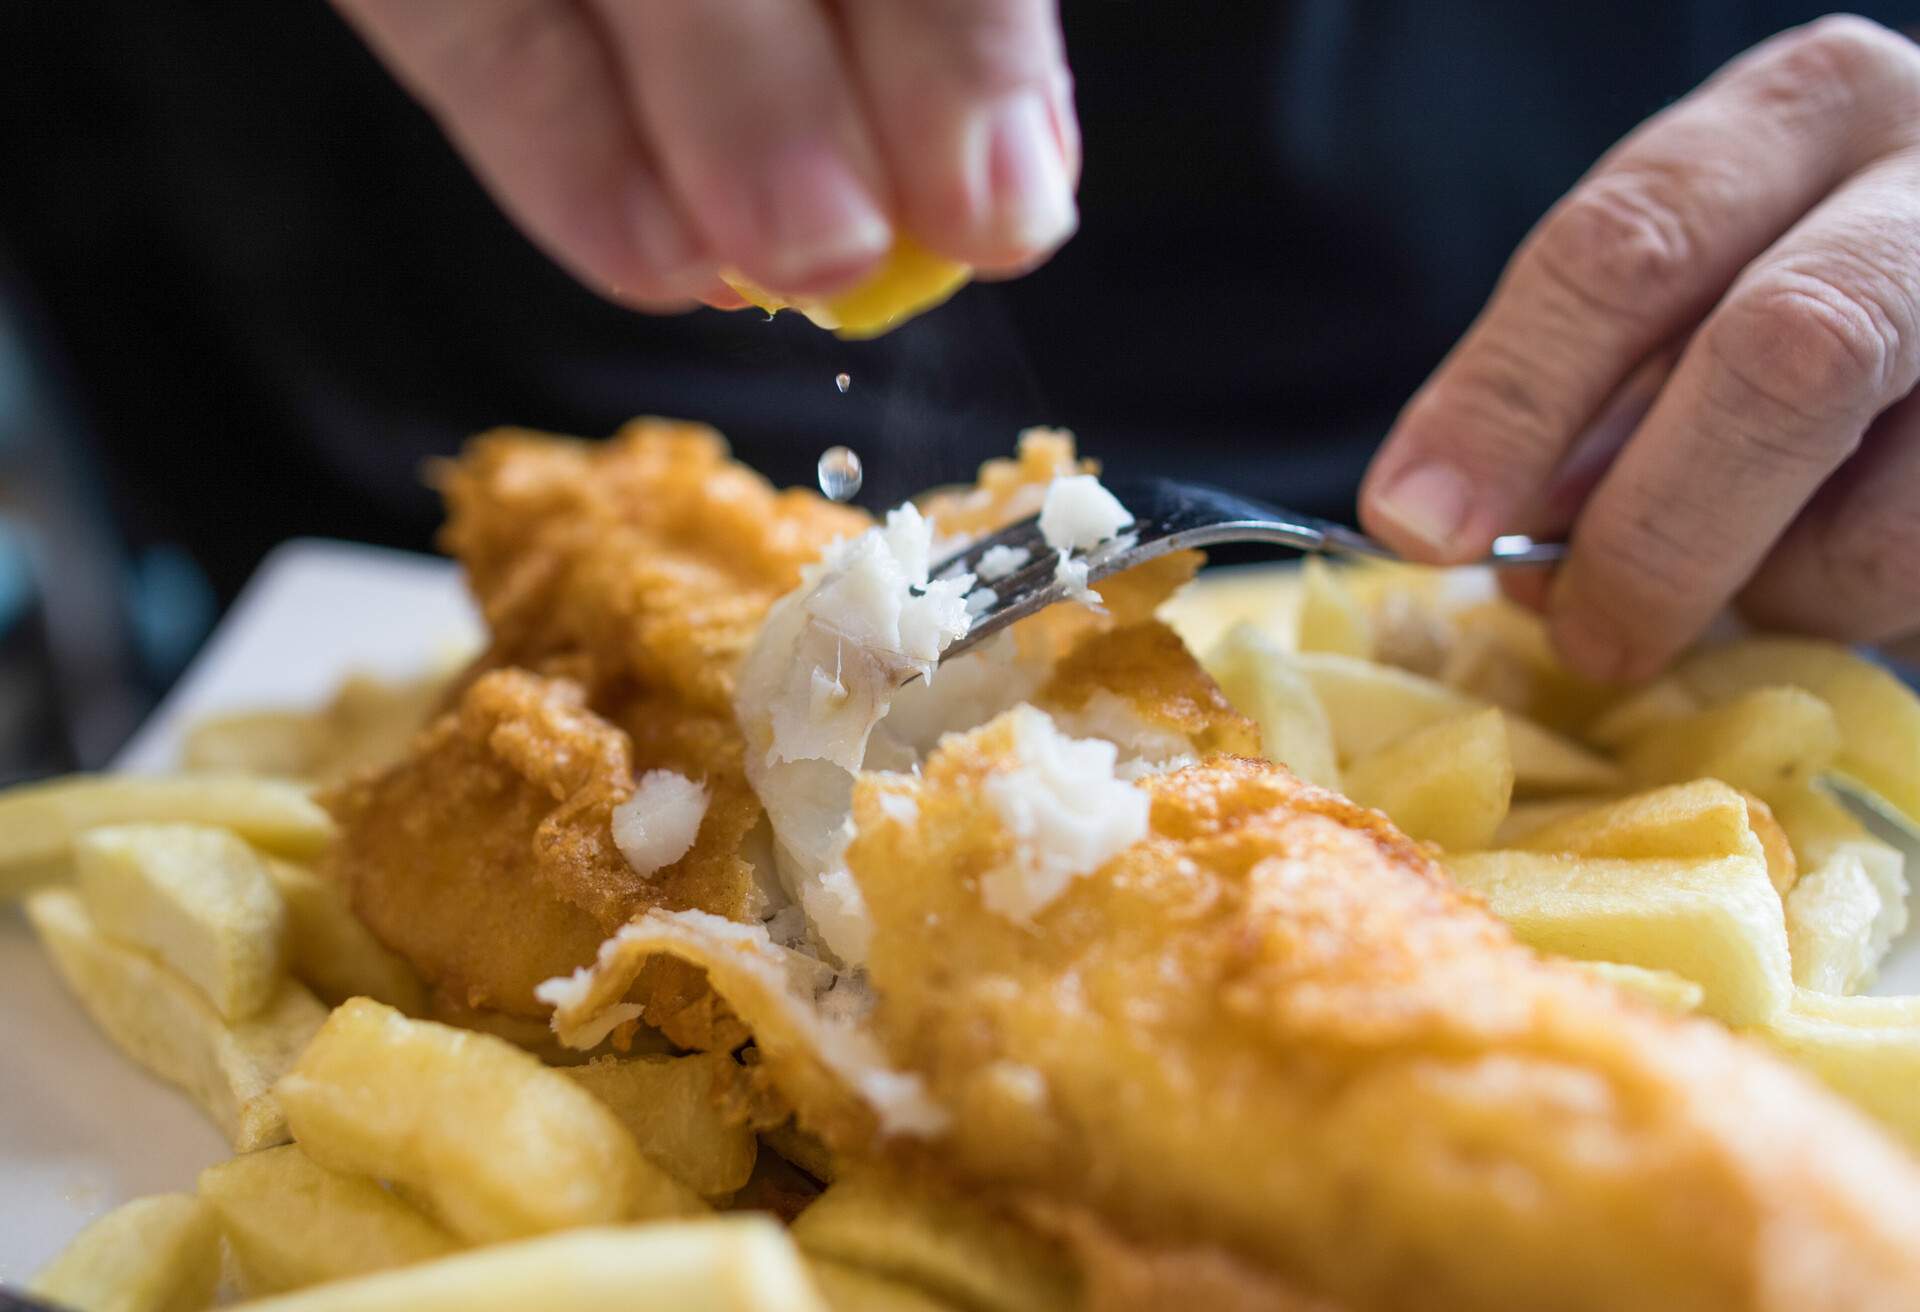 A customer squeezes a lemon over a cod and chips. Photographer: Chris Ratcliffe/Bloomberg